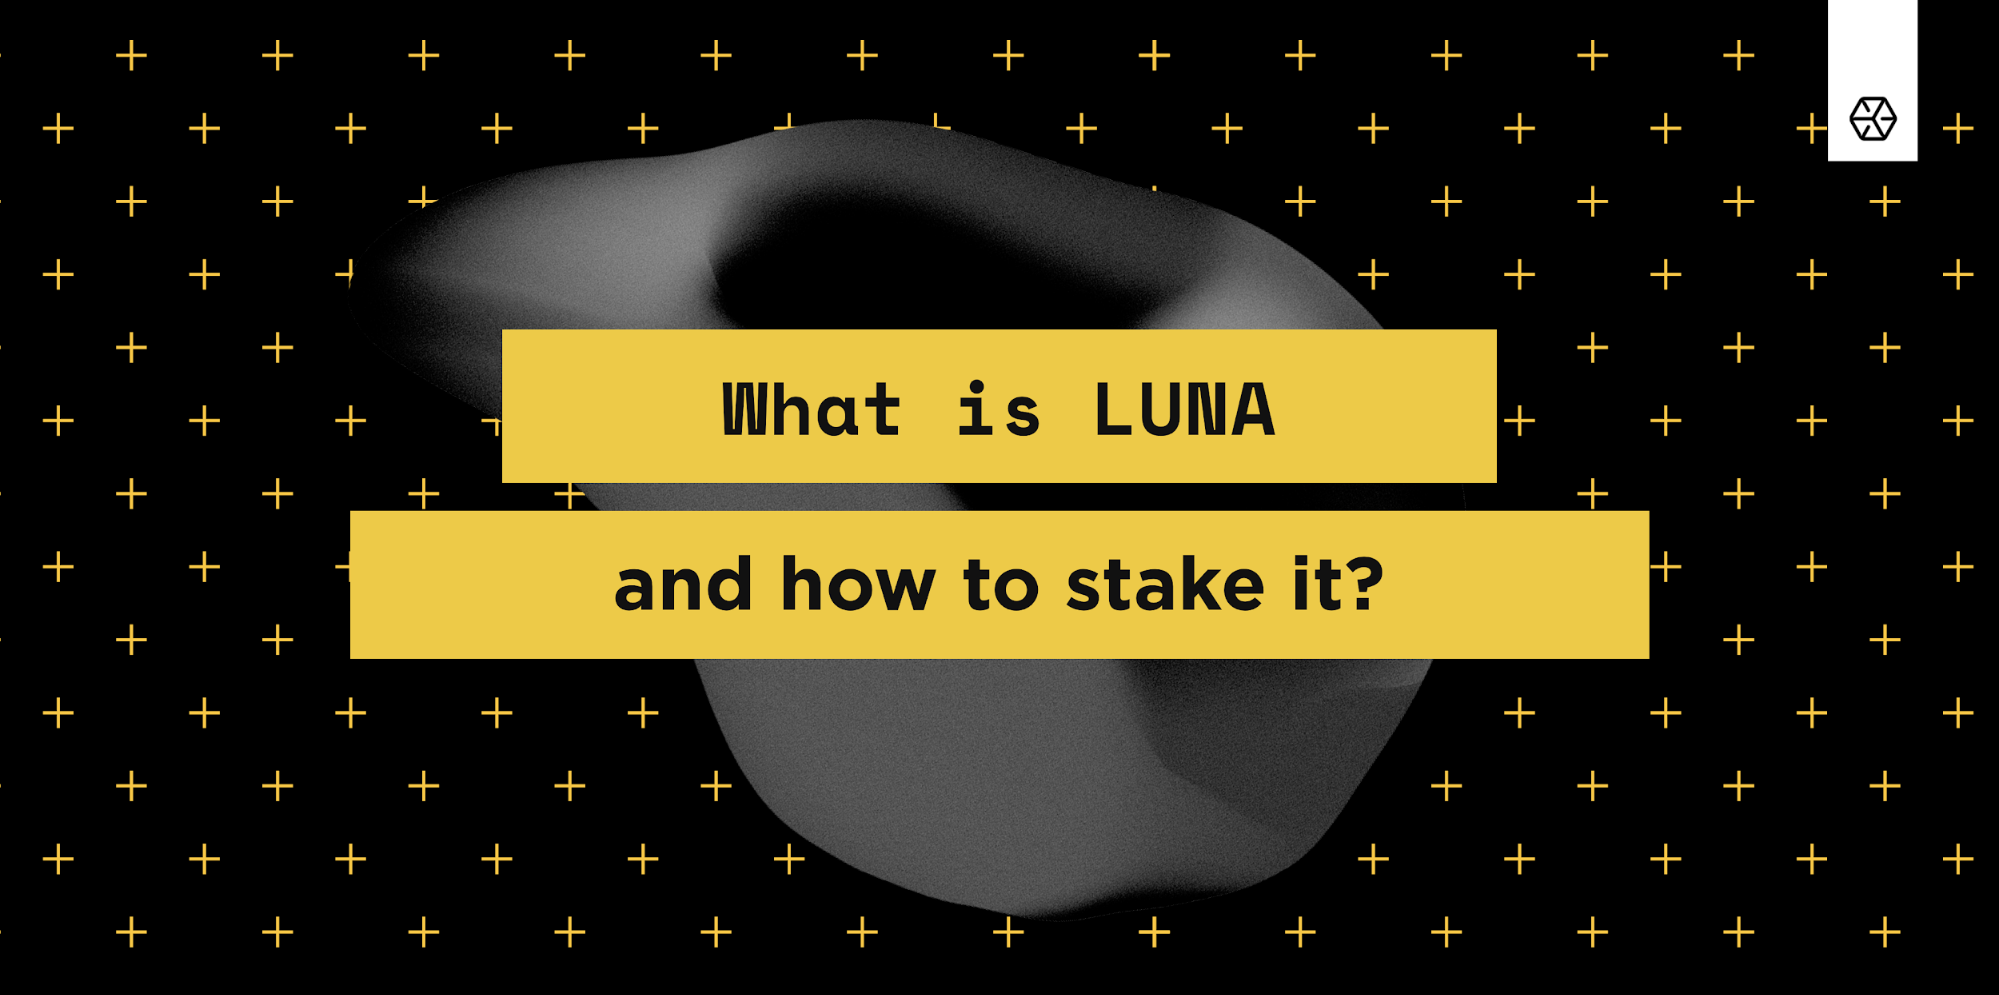 What is  Luna?